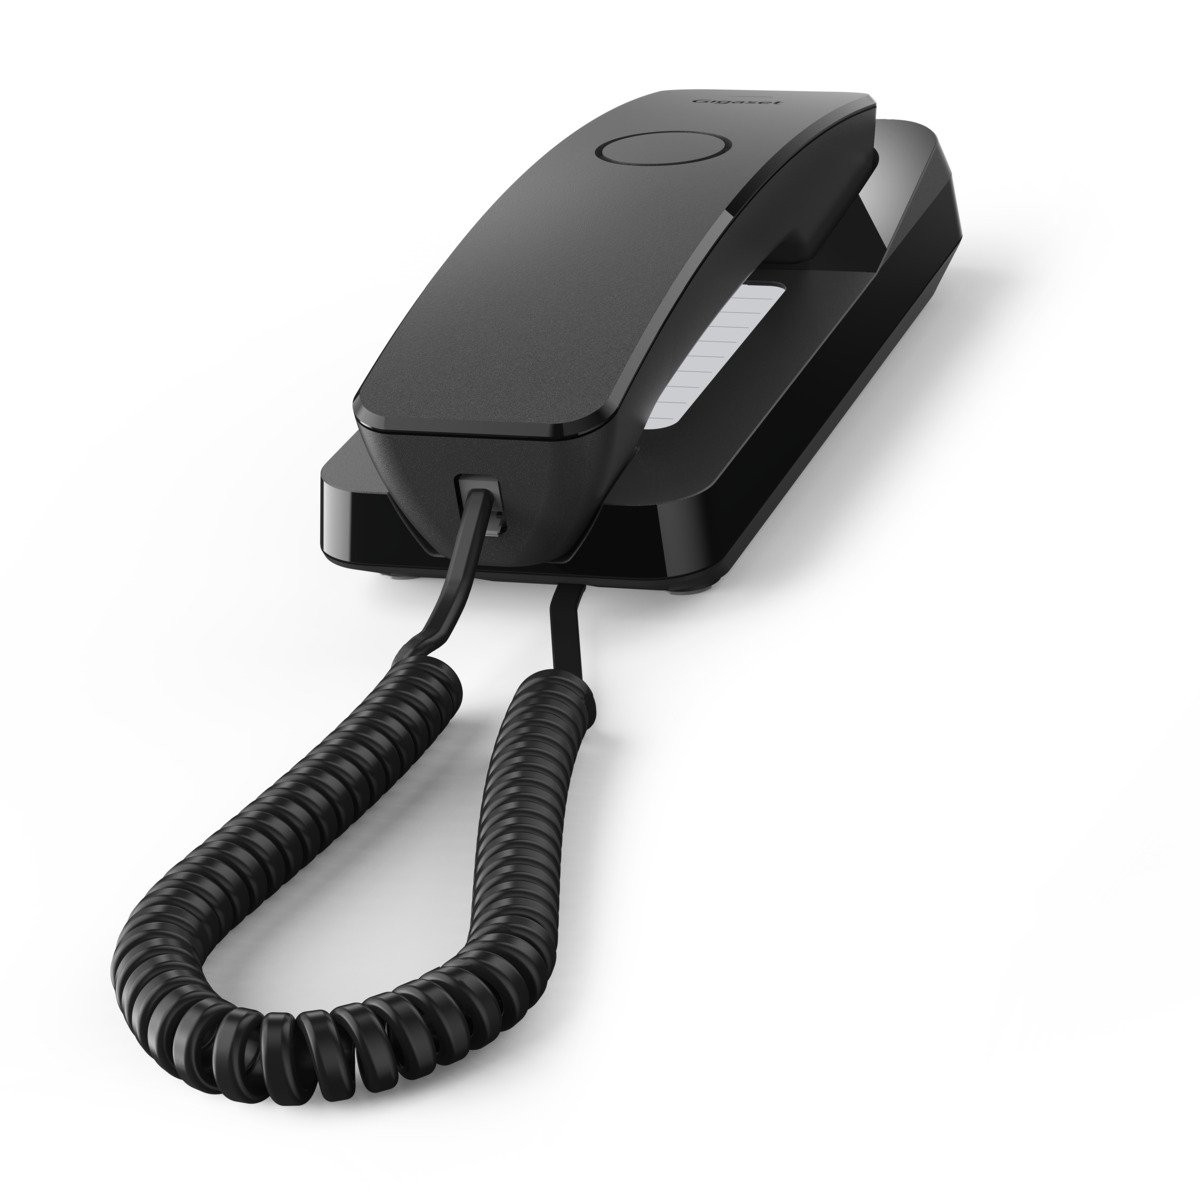 S30054-H6539-B101 UNIFY GIGASET OPENSTAGE DESK 200 - Analog telephone - Wired handset - 10 entries - Black